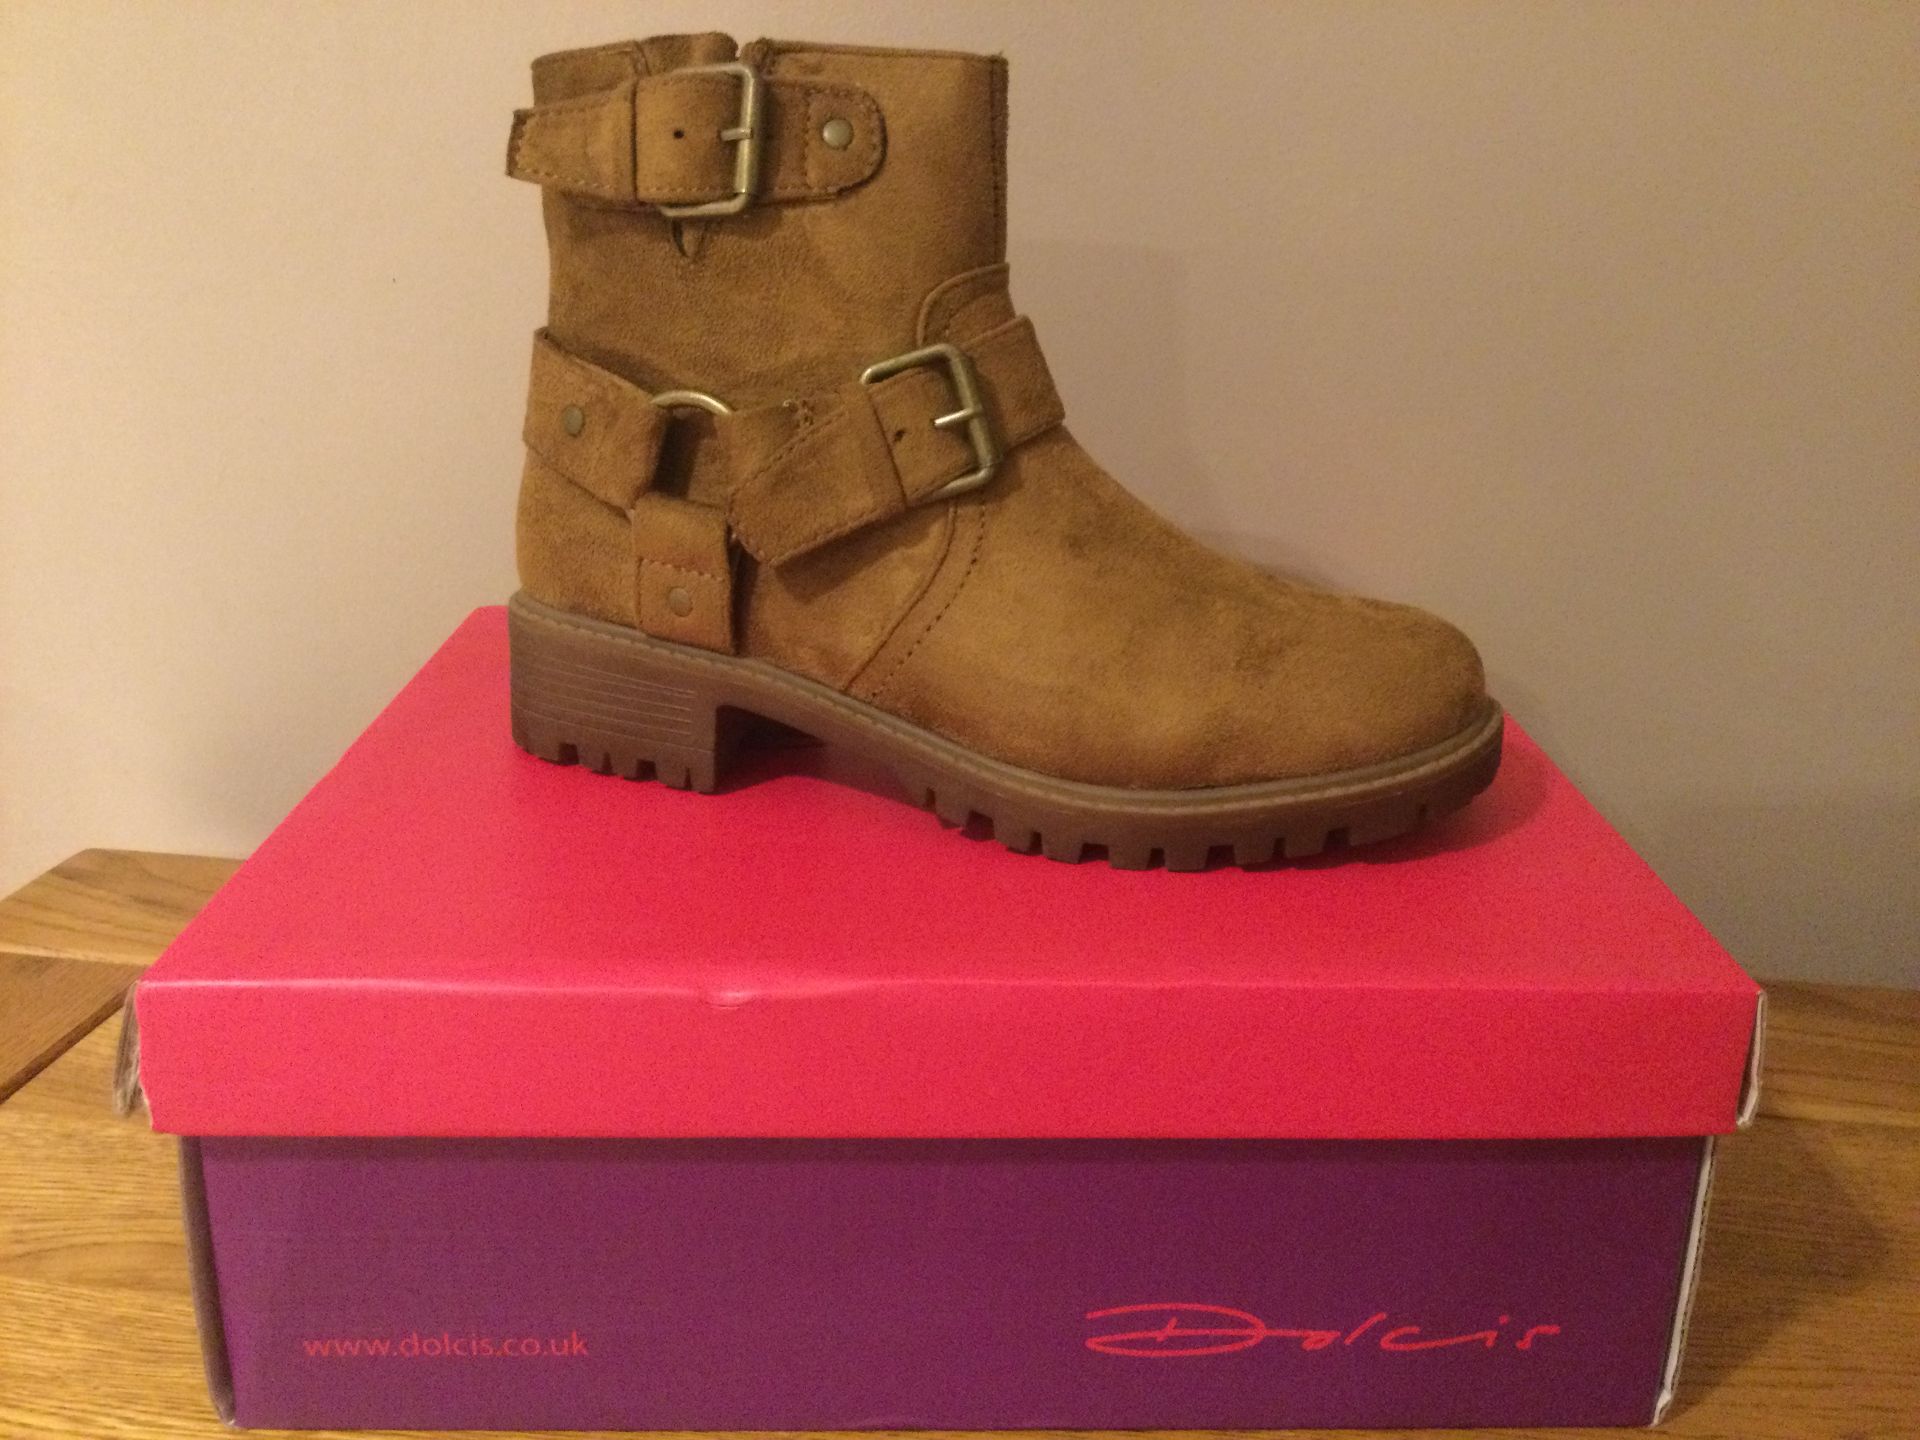 Dolcis “Davis” Ankle Boots, Size 3, Tan - New RRP £49.00 - Image 2 of 5